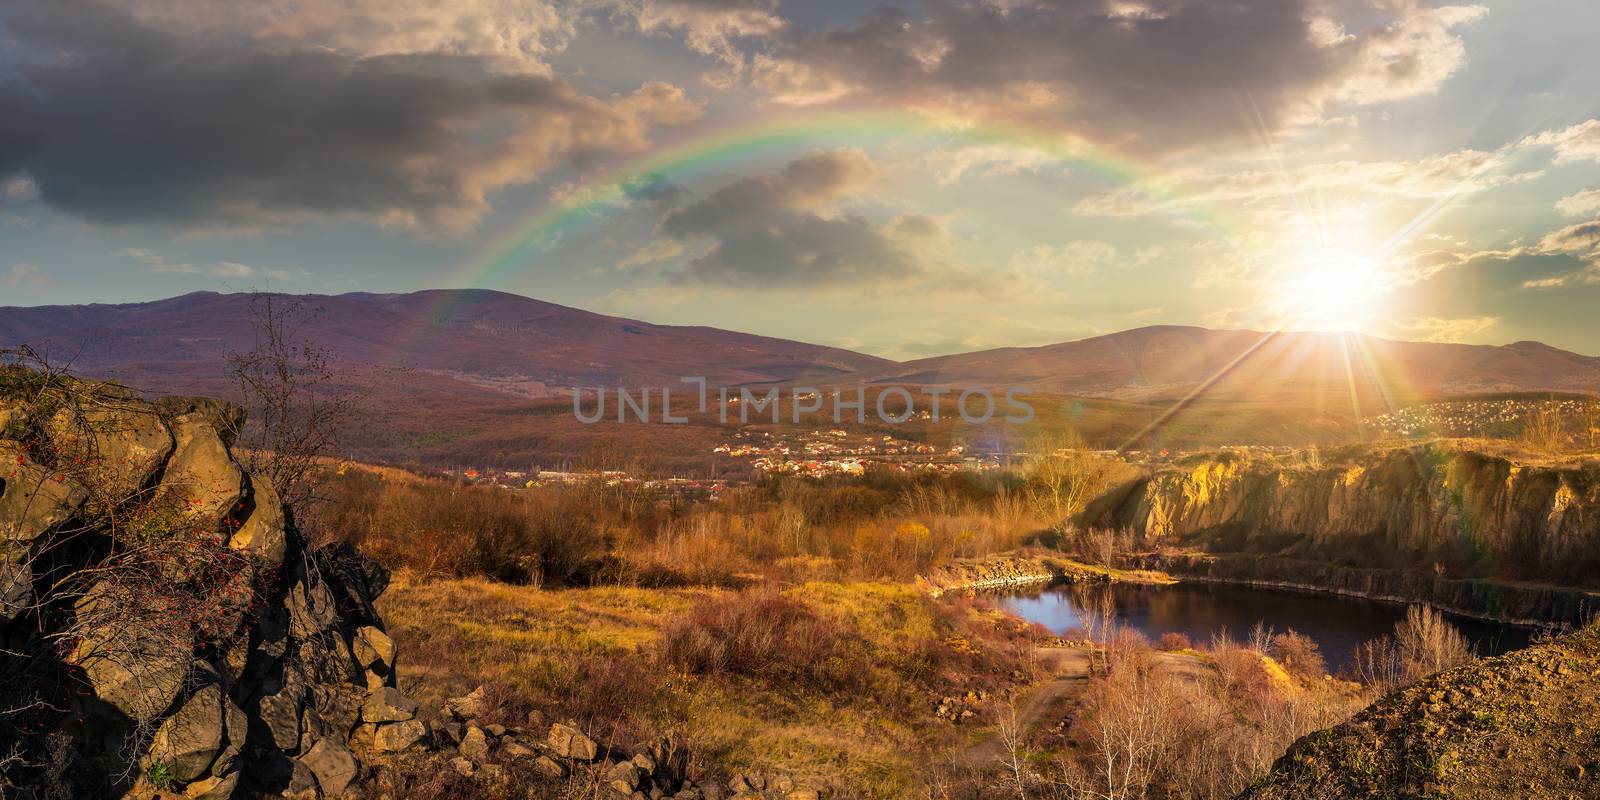 collage of small lake in an abandoned stone quarry in the mountains outside the city in sunset light with rainbow